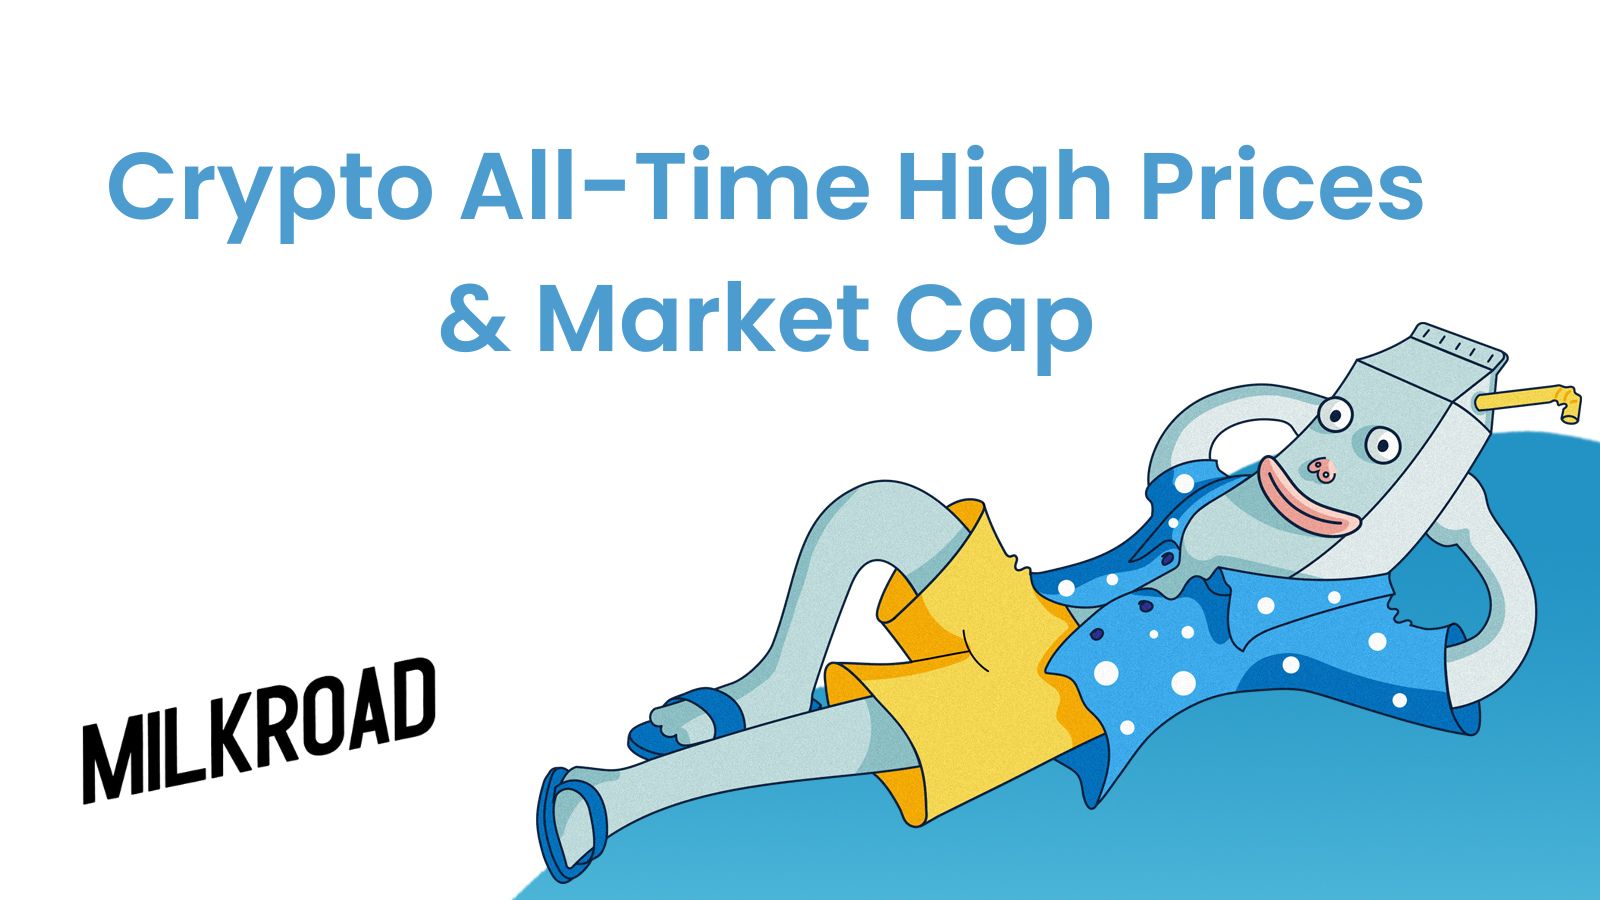 Crypto All-Time High Prices & Market Cap